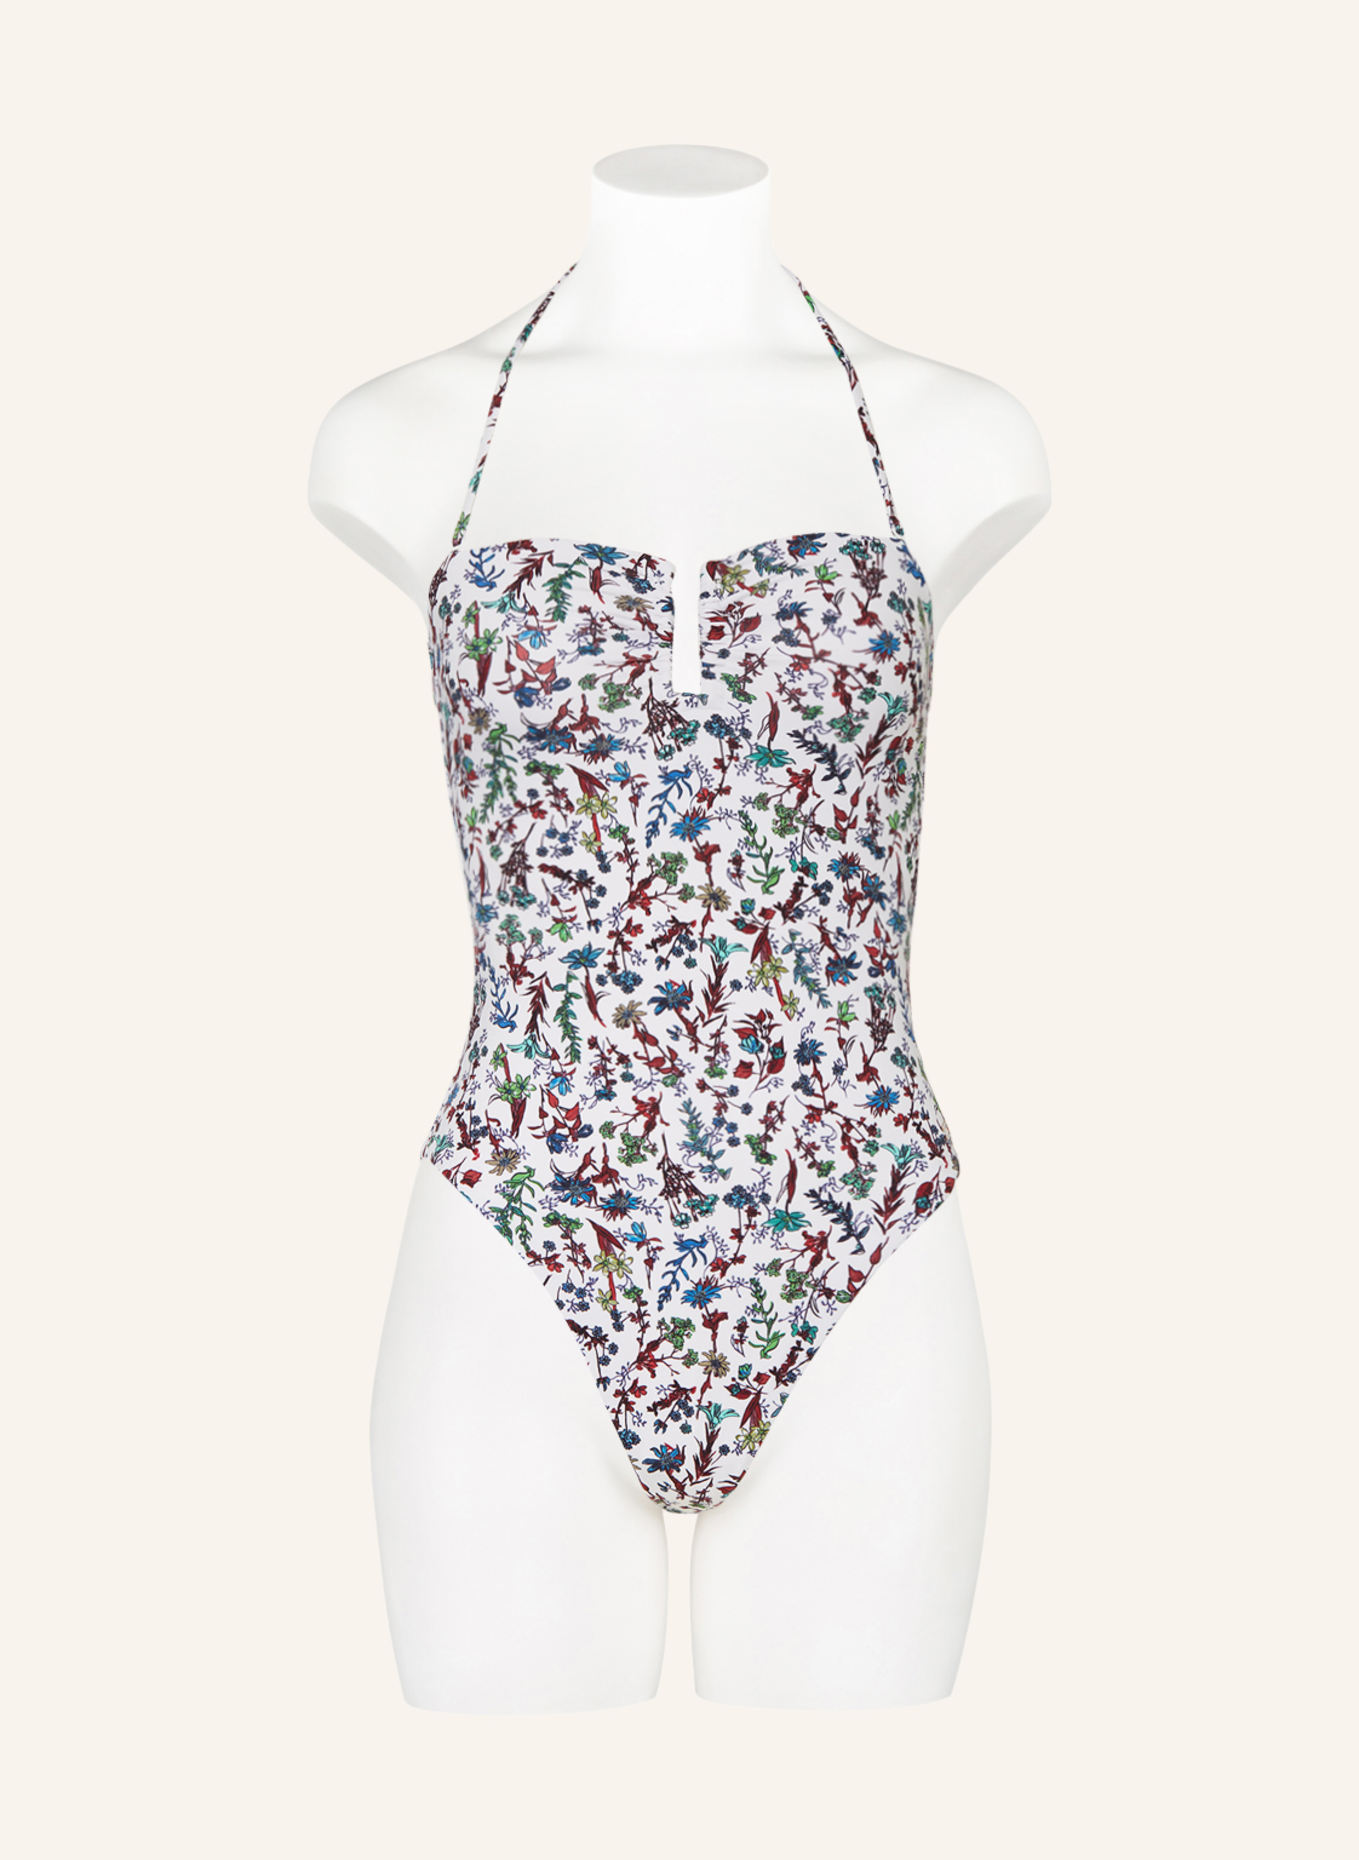 TOMMY HILFIGER Bandeau swimsuit in white/ blue/ green